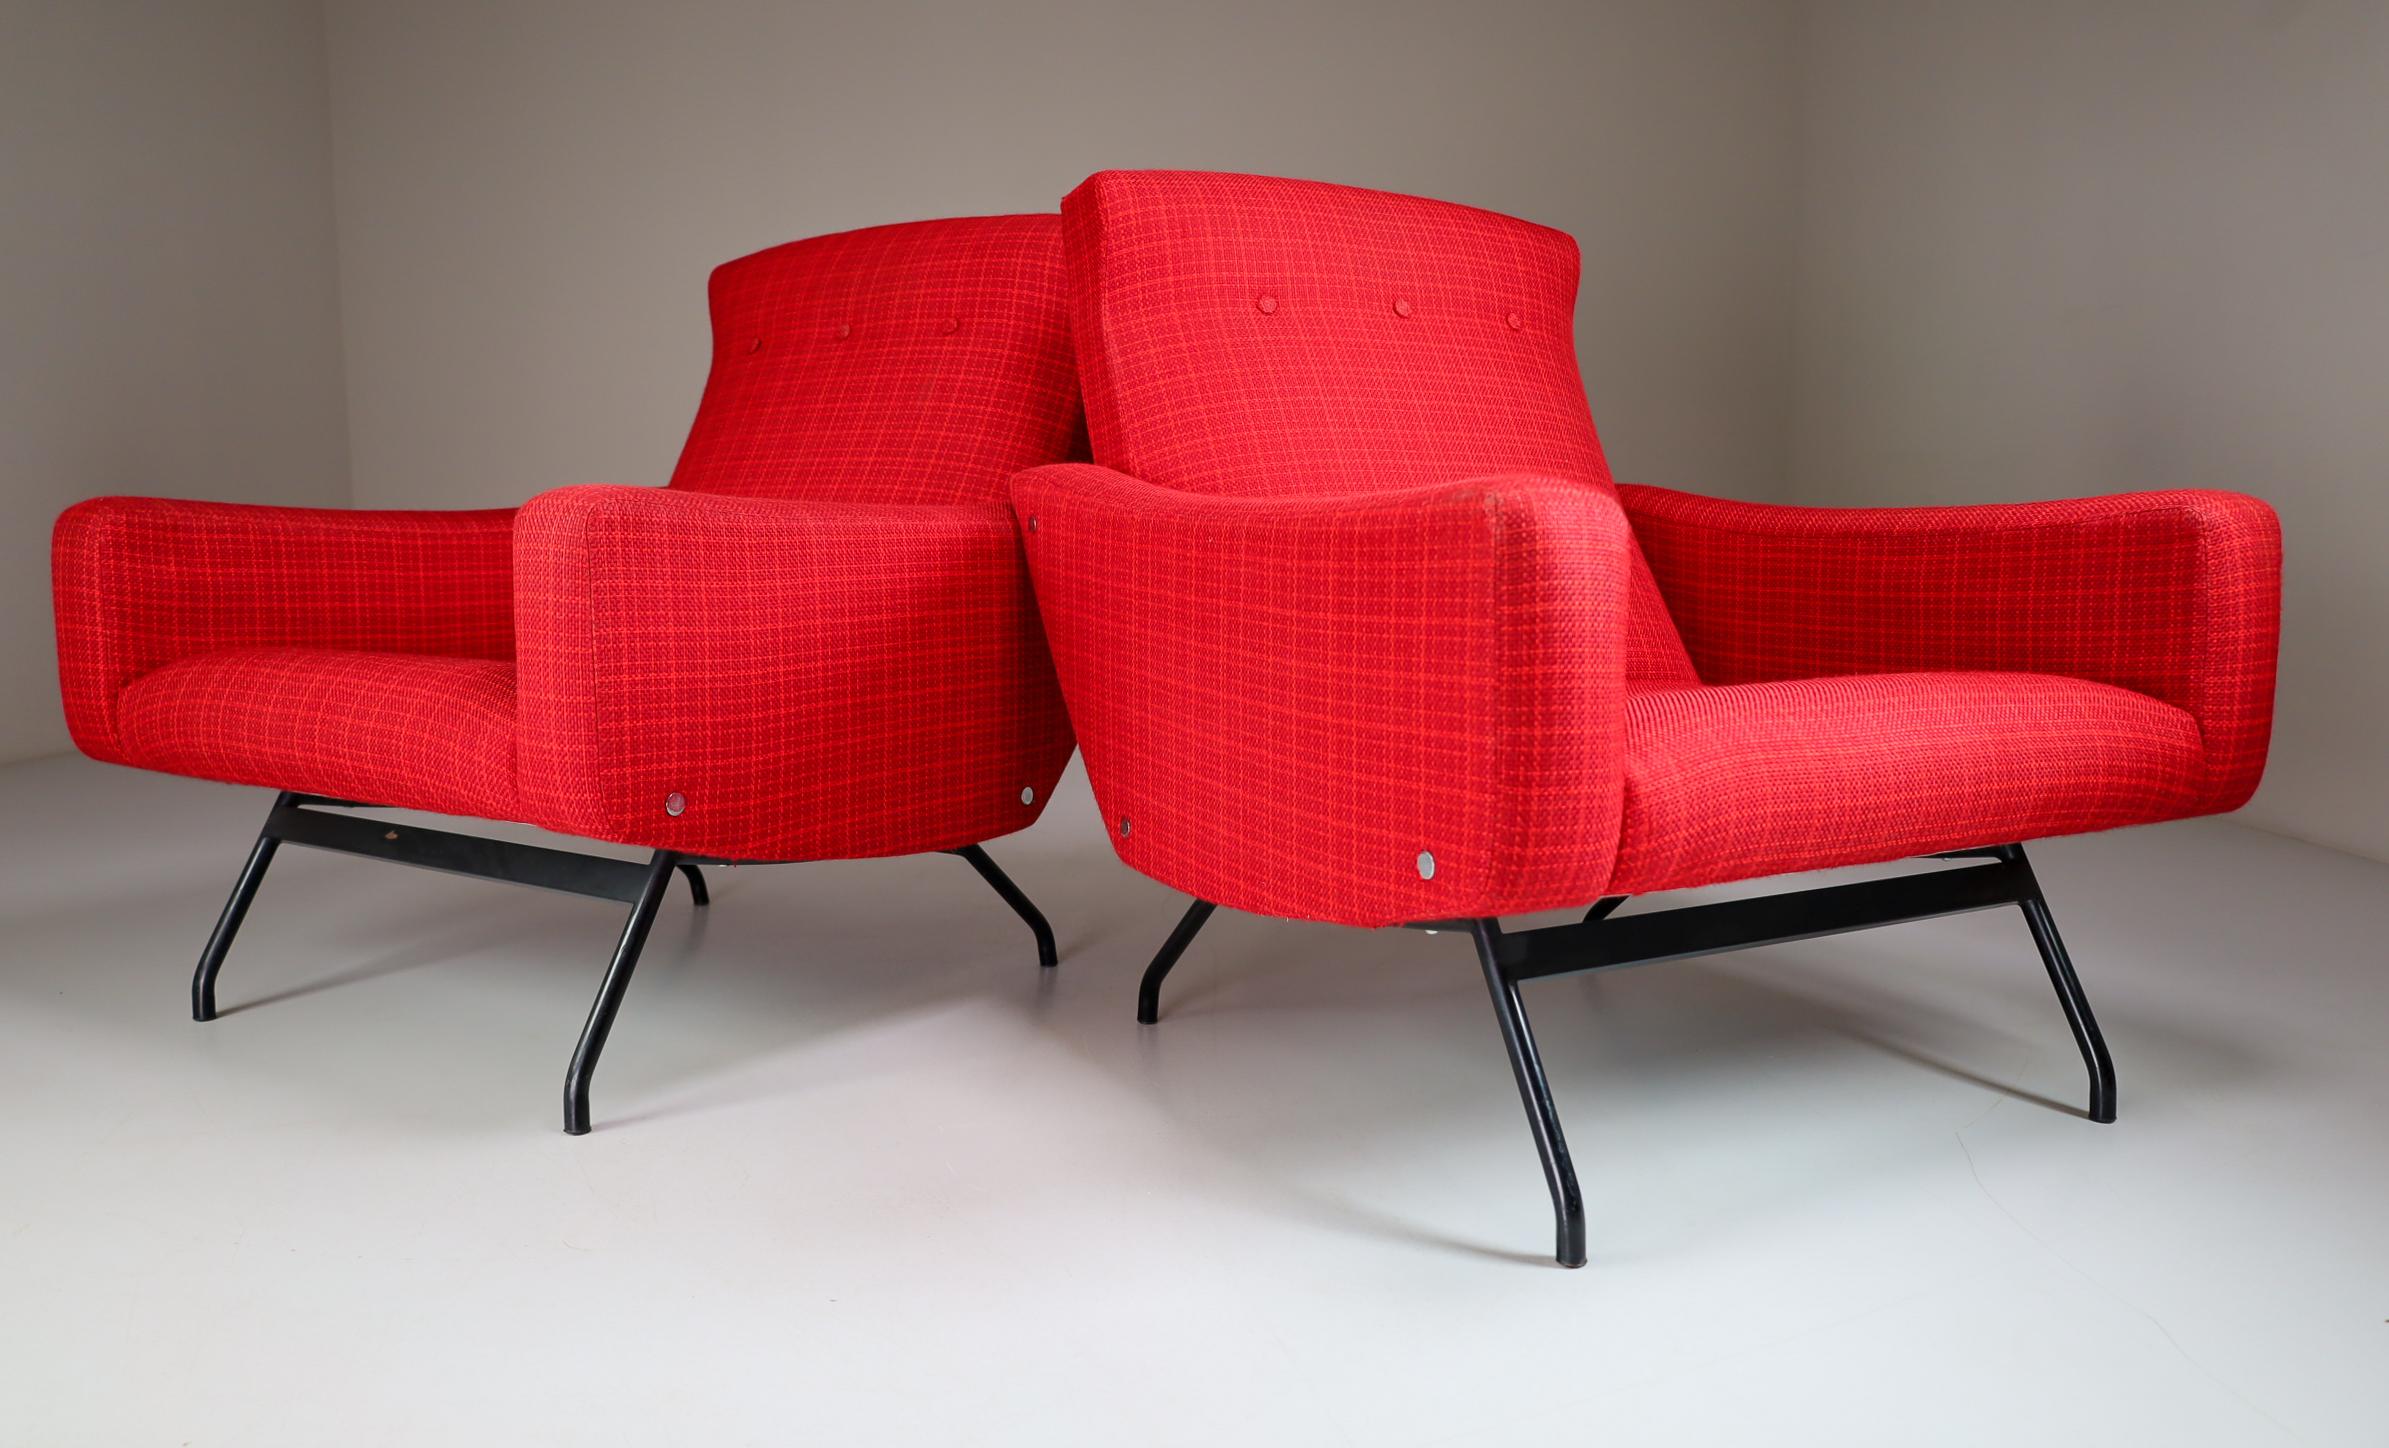 Interesting pair of easy chairs, designed by Joseph-Andre´ Motte, France 1950s.These well made armchairs were manufactured by Steiner and show wonderful craftsmanship. The red fabric upholstery is original and in amazing good condition. The design